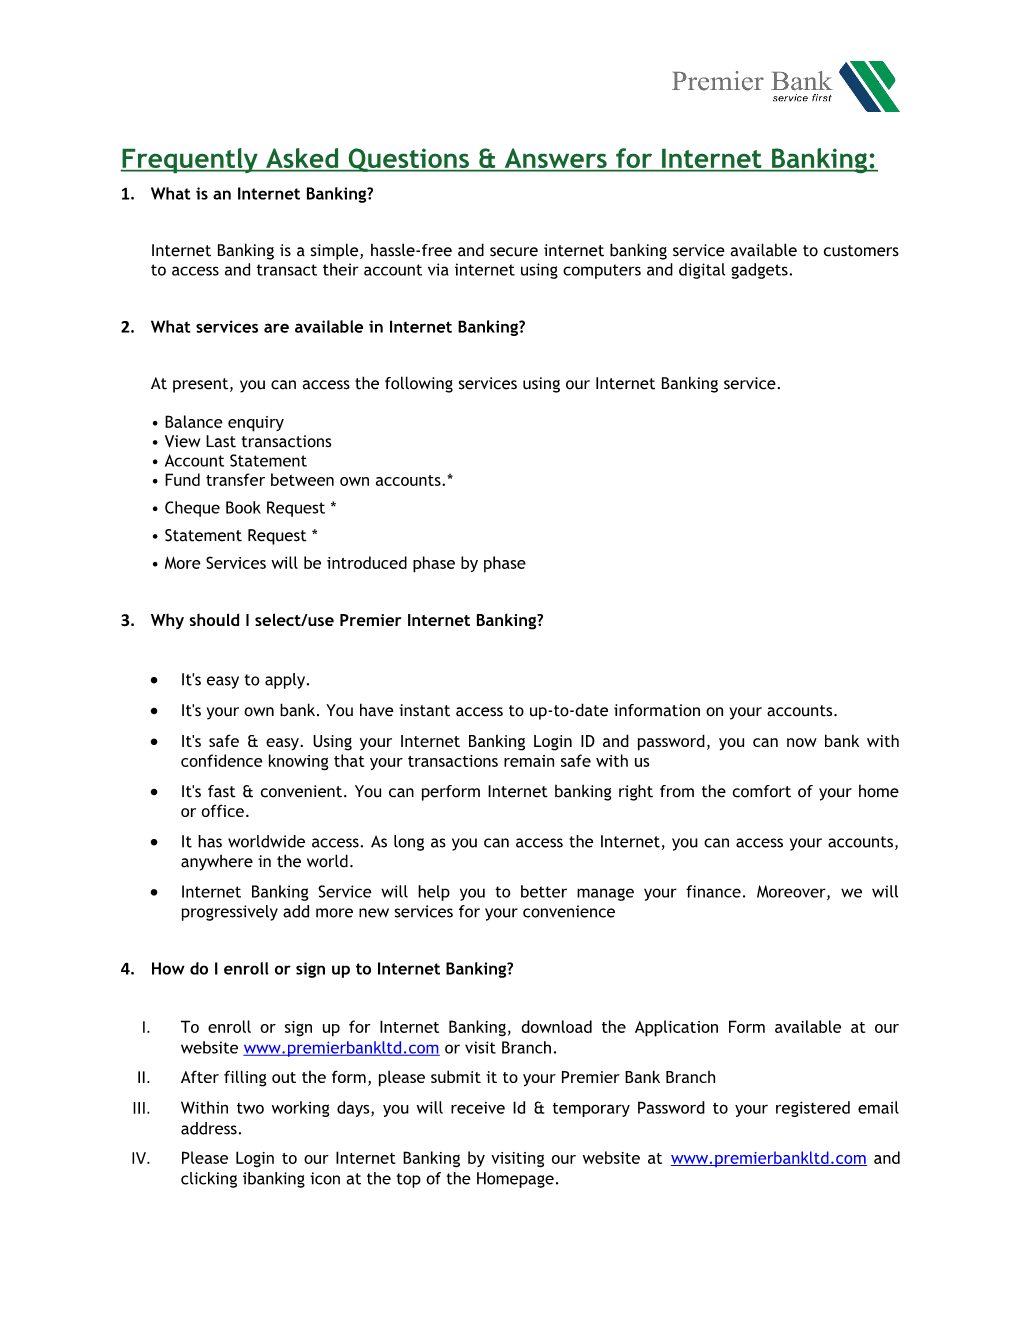 Frequently Asked Questions& Answersfor Internet Banking